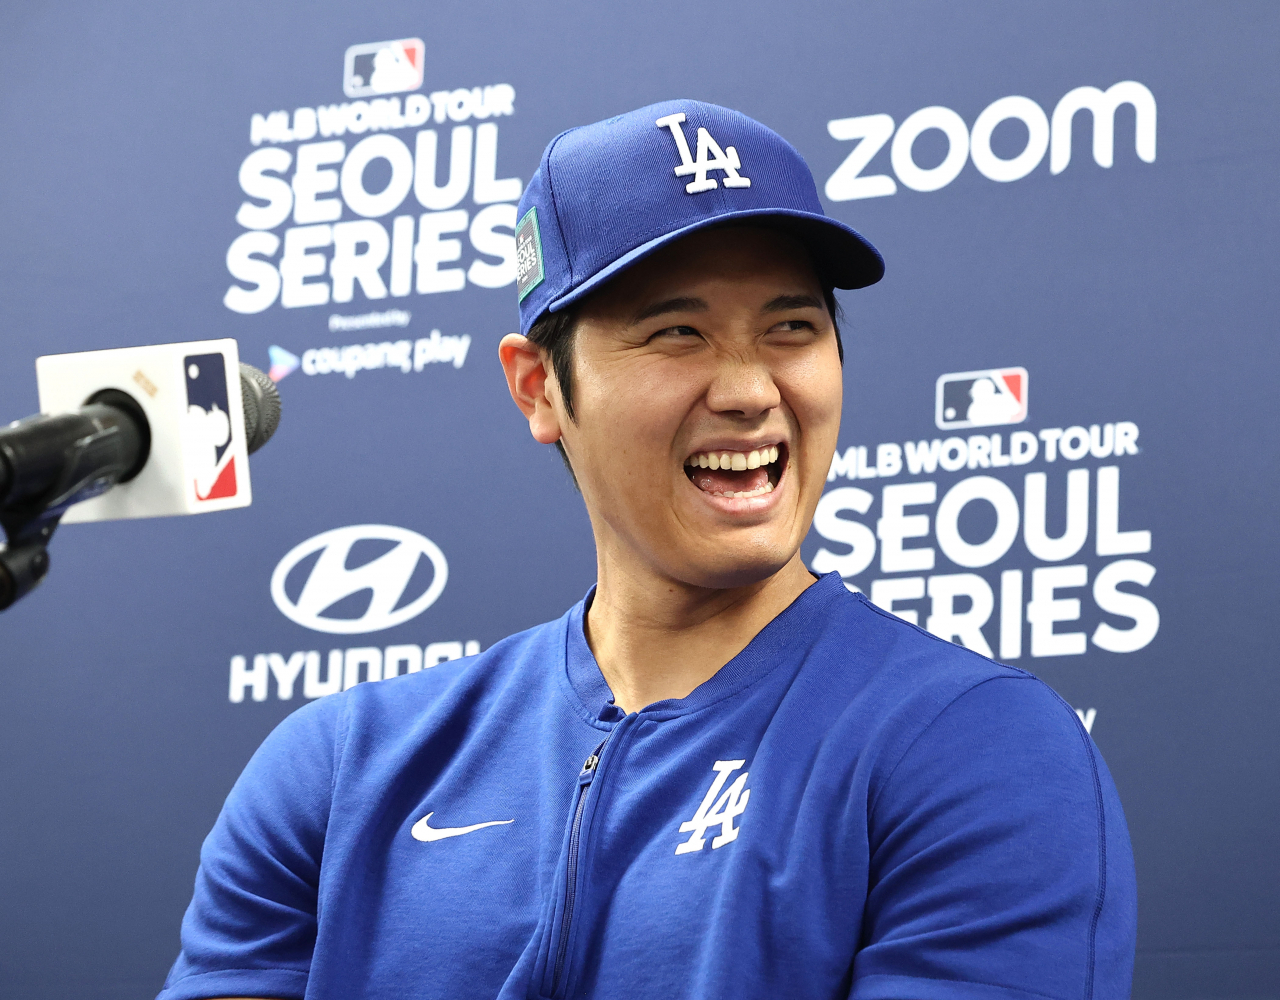 Shohei Ohtani of the Los Angeles Dodgers smiles at a press conference at Gocheok Sky Dome in Seoul on Saturday ahead of a workout for Major League Baseball's Seoul Series. (Yonhap)